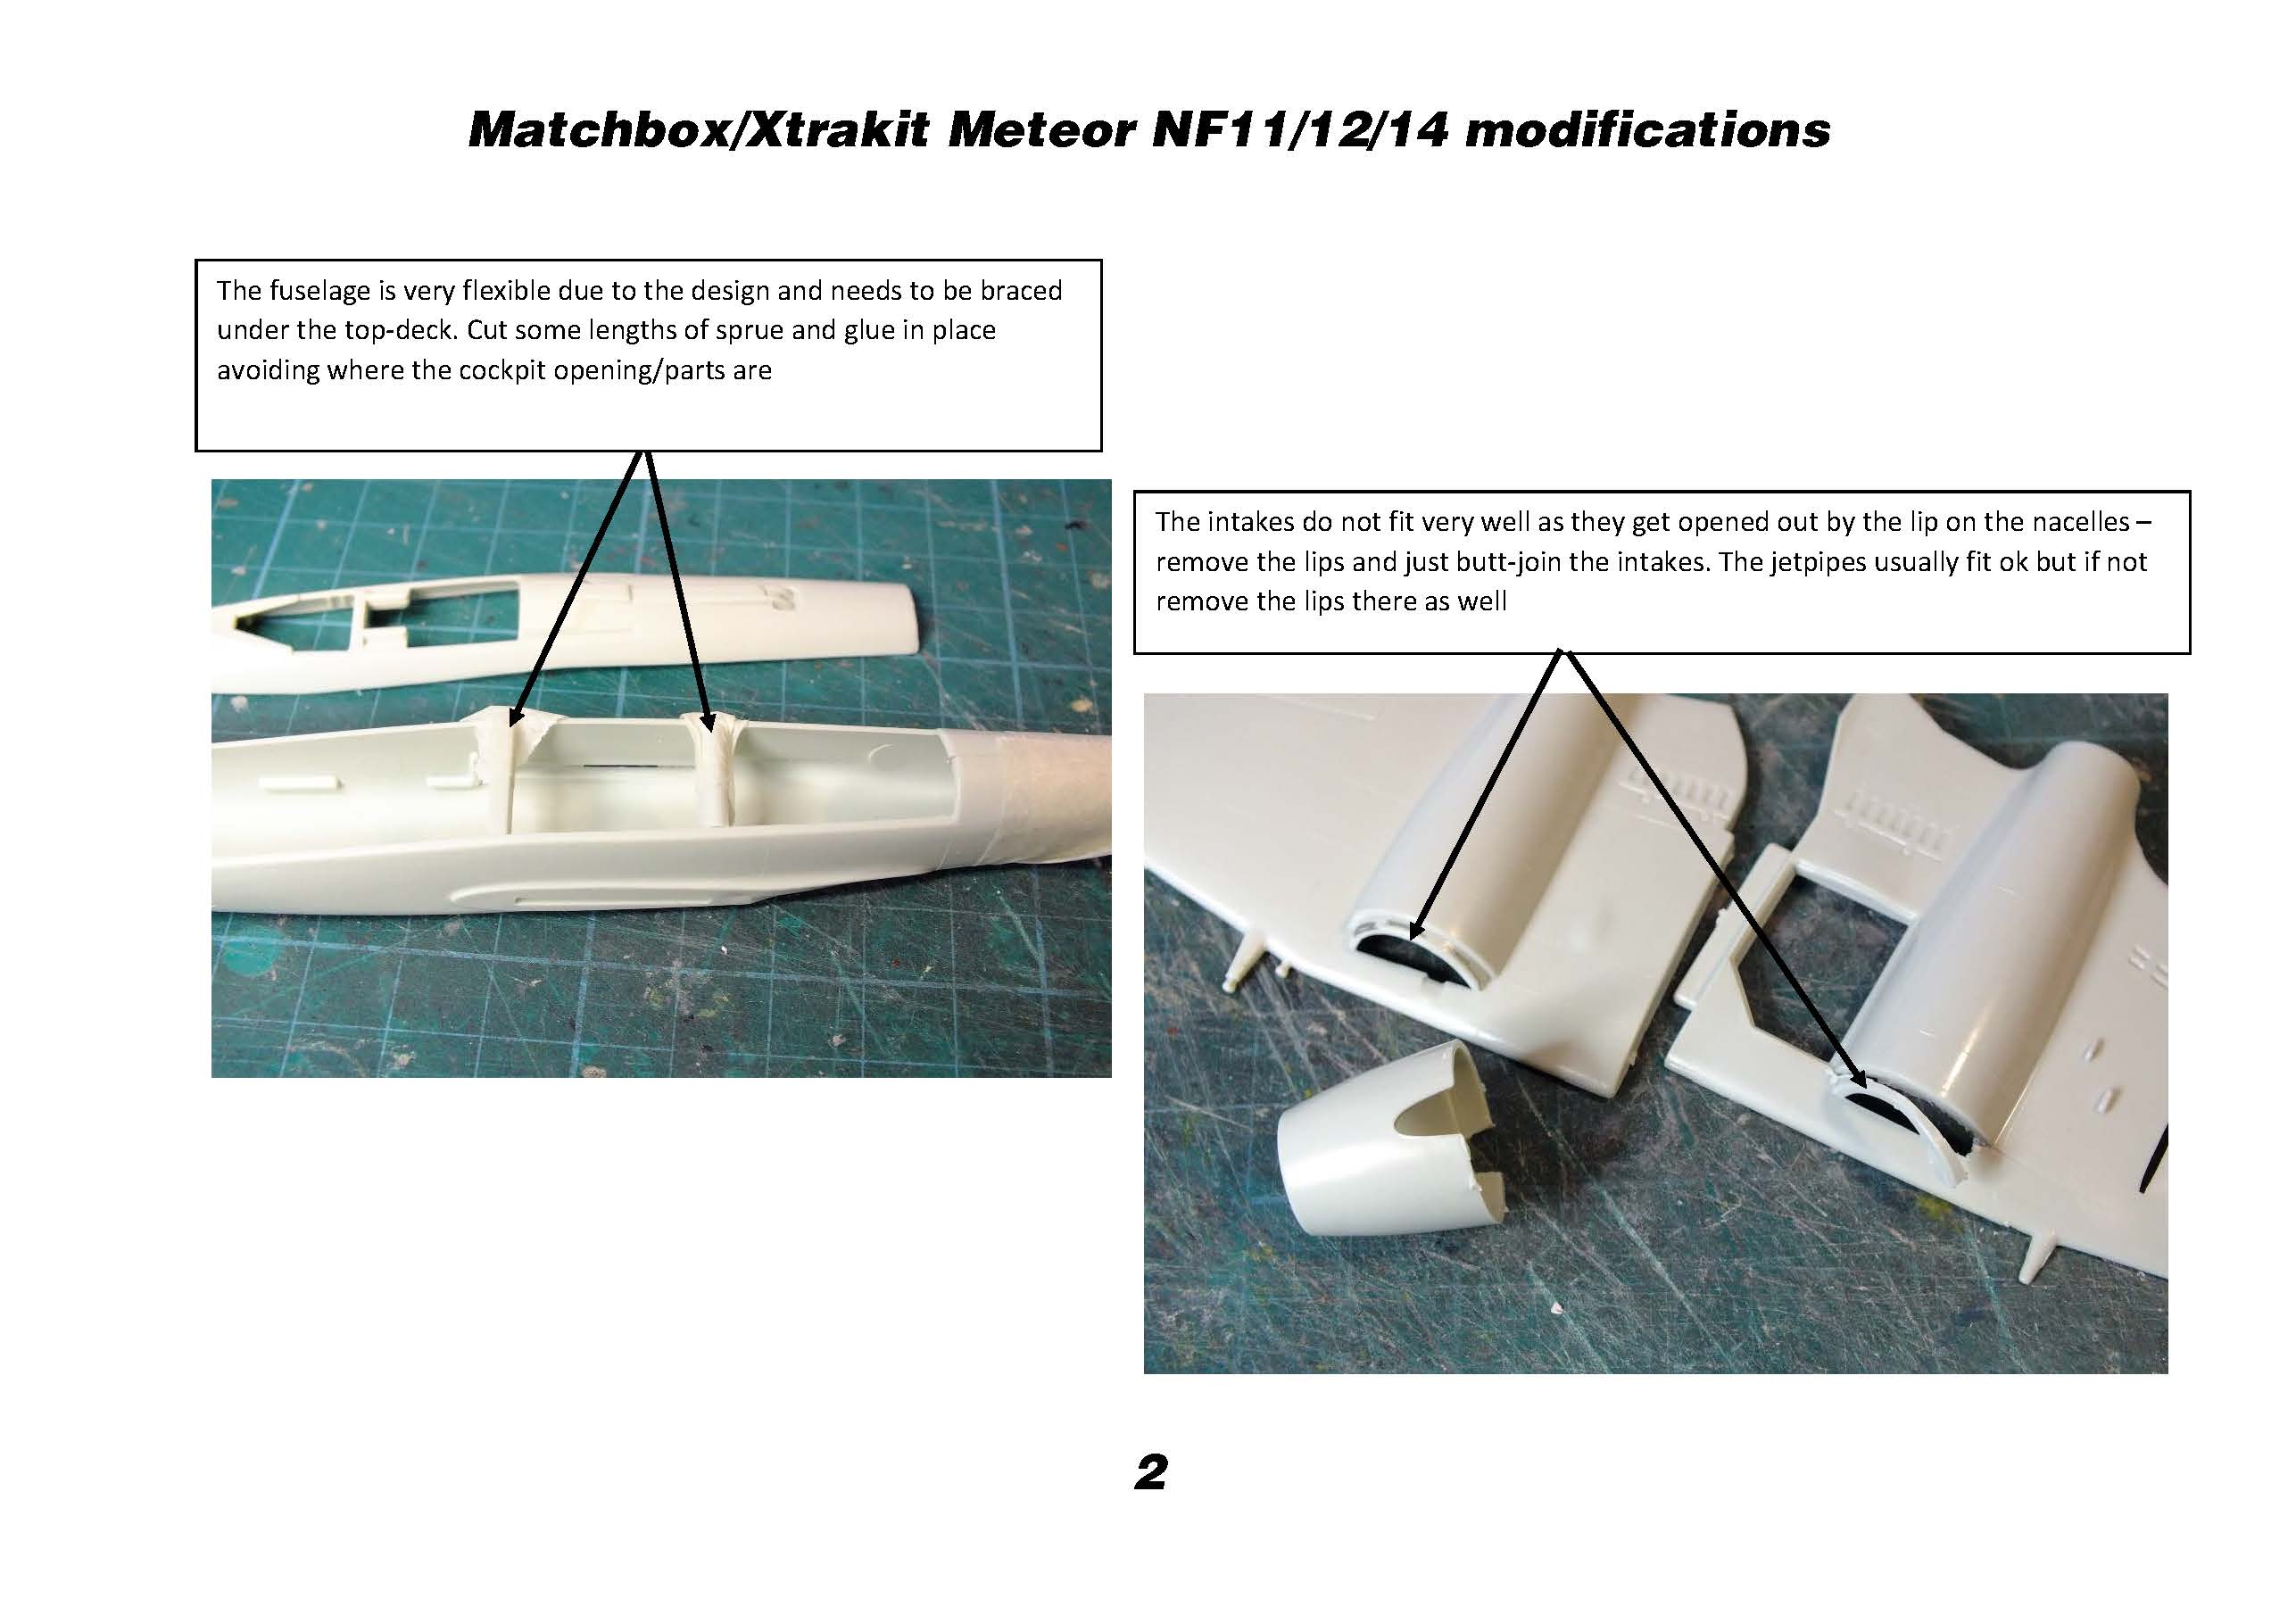 NF kit modifications_Page_2.jpg  by Britjet